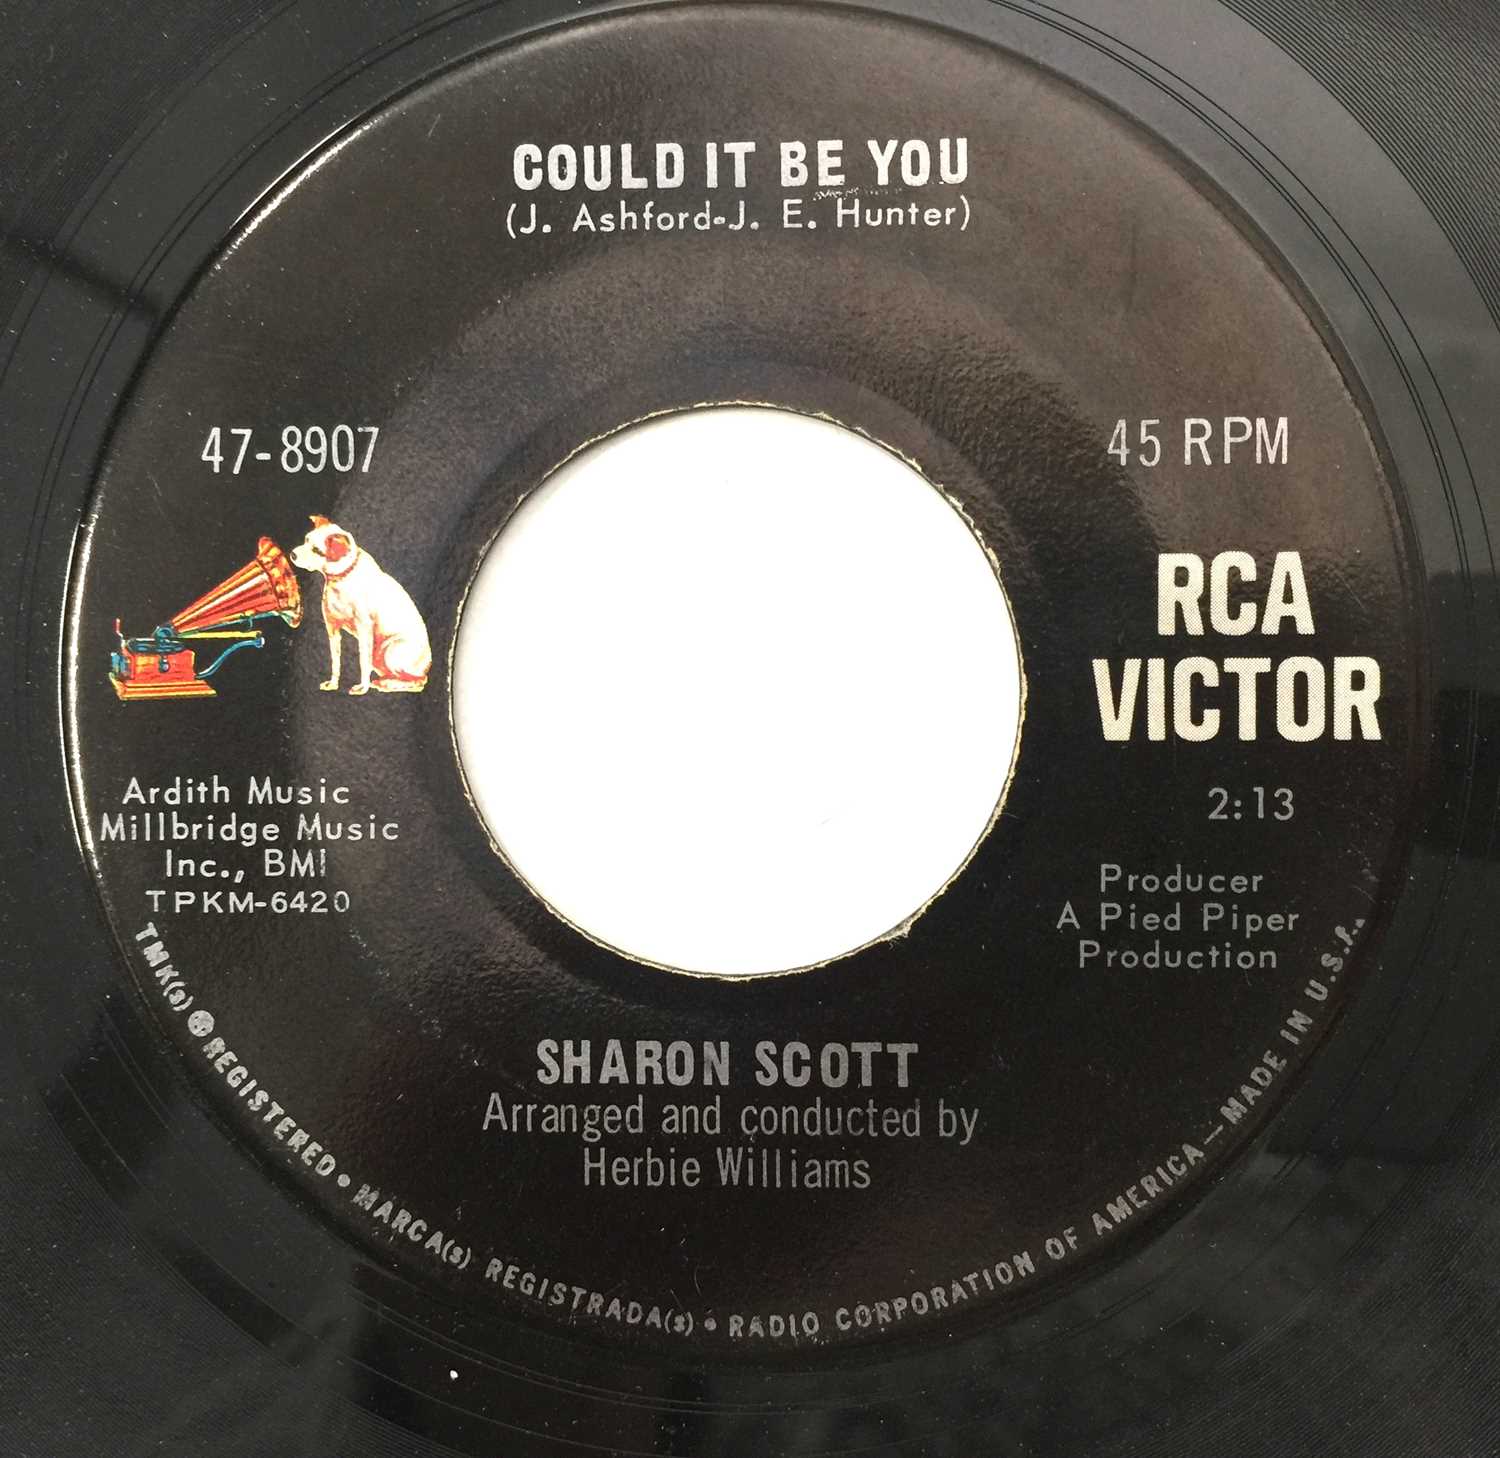 Lot 14 - SHARON SCOTT - COULD IT BE YOU/ I'D LIKE TO KNOW 7" (US NORTHERN - RCA - 47-8907)